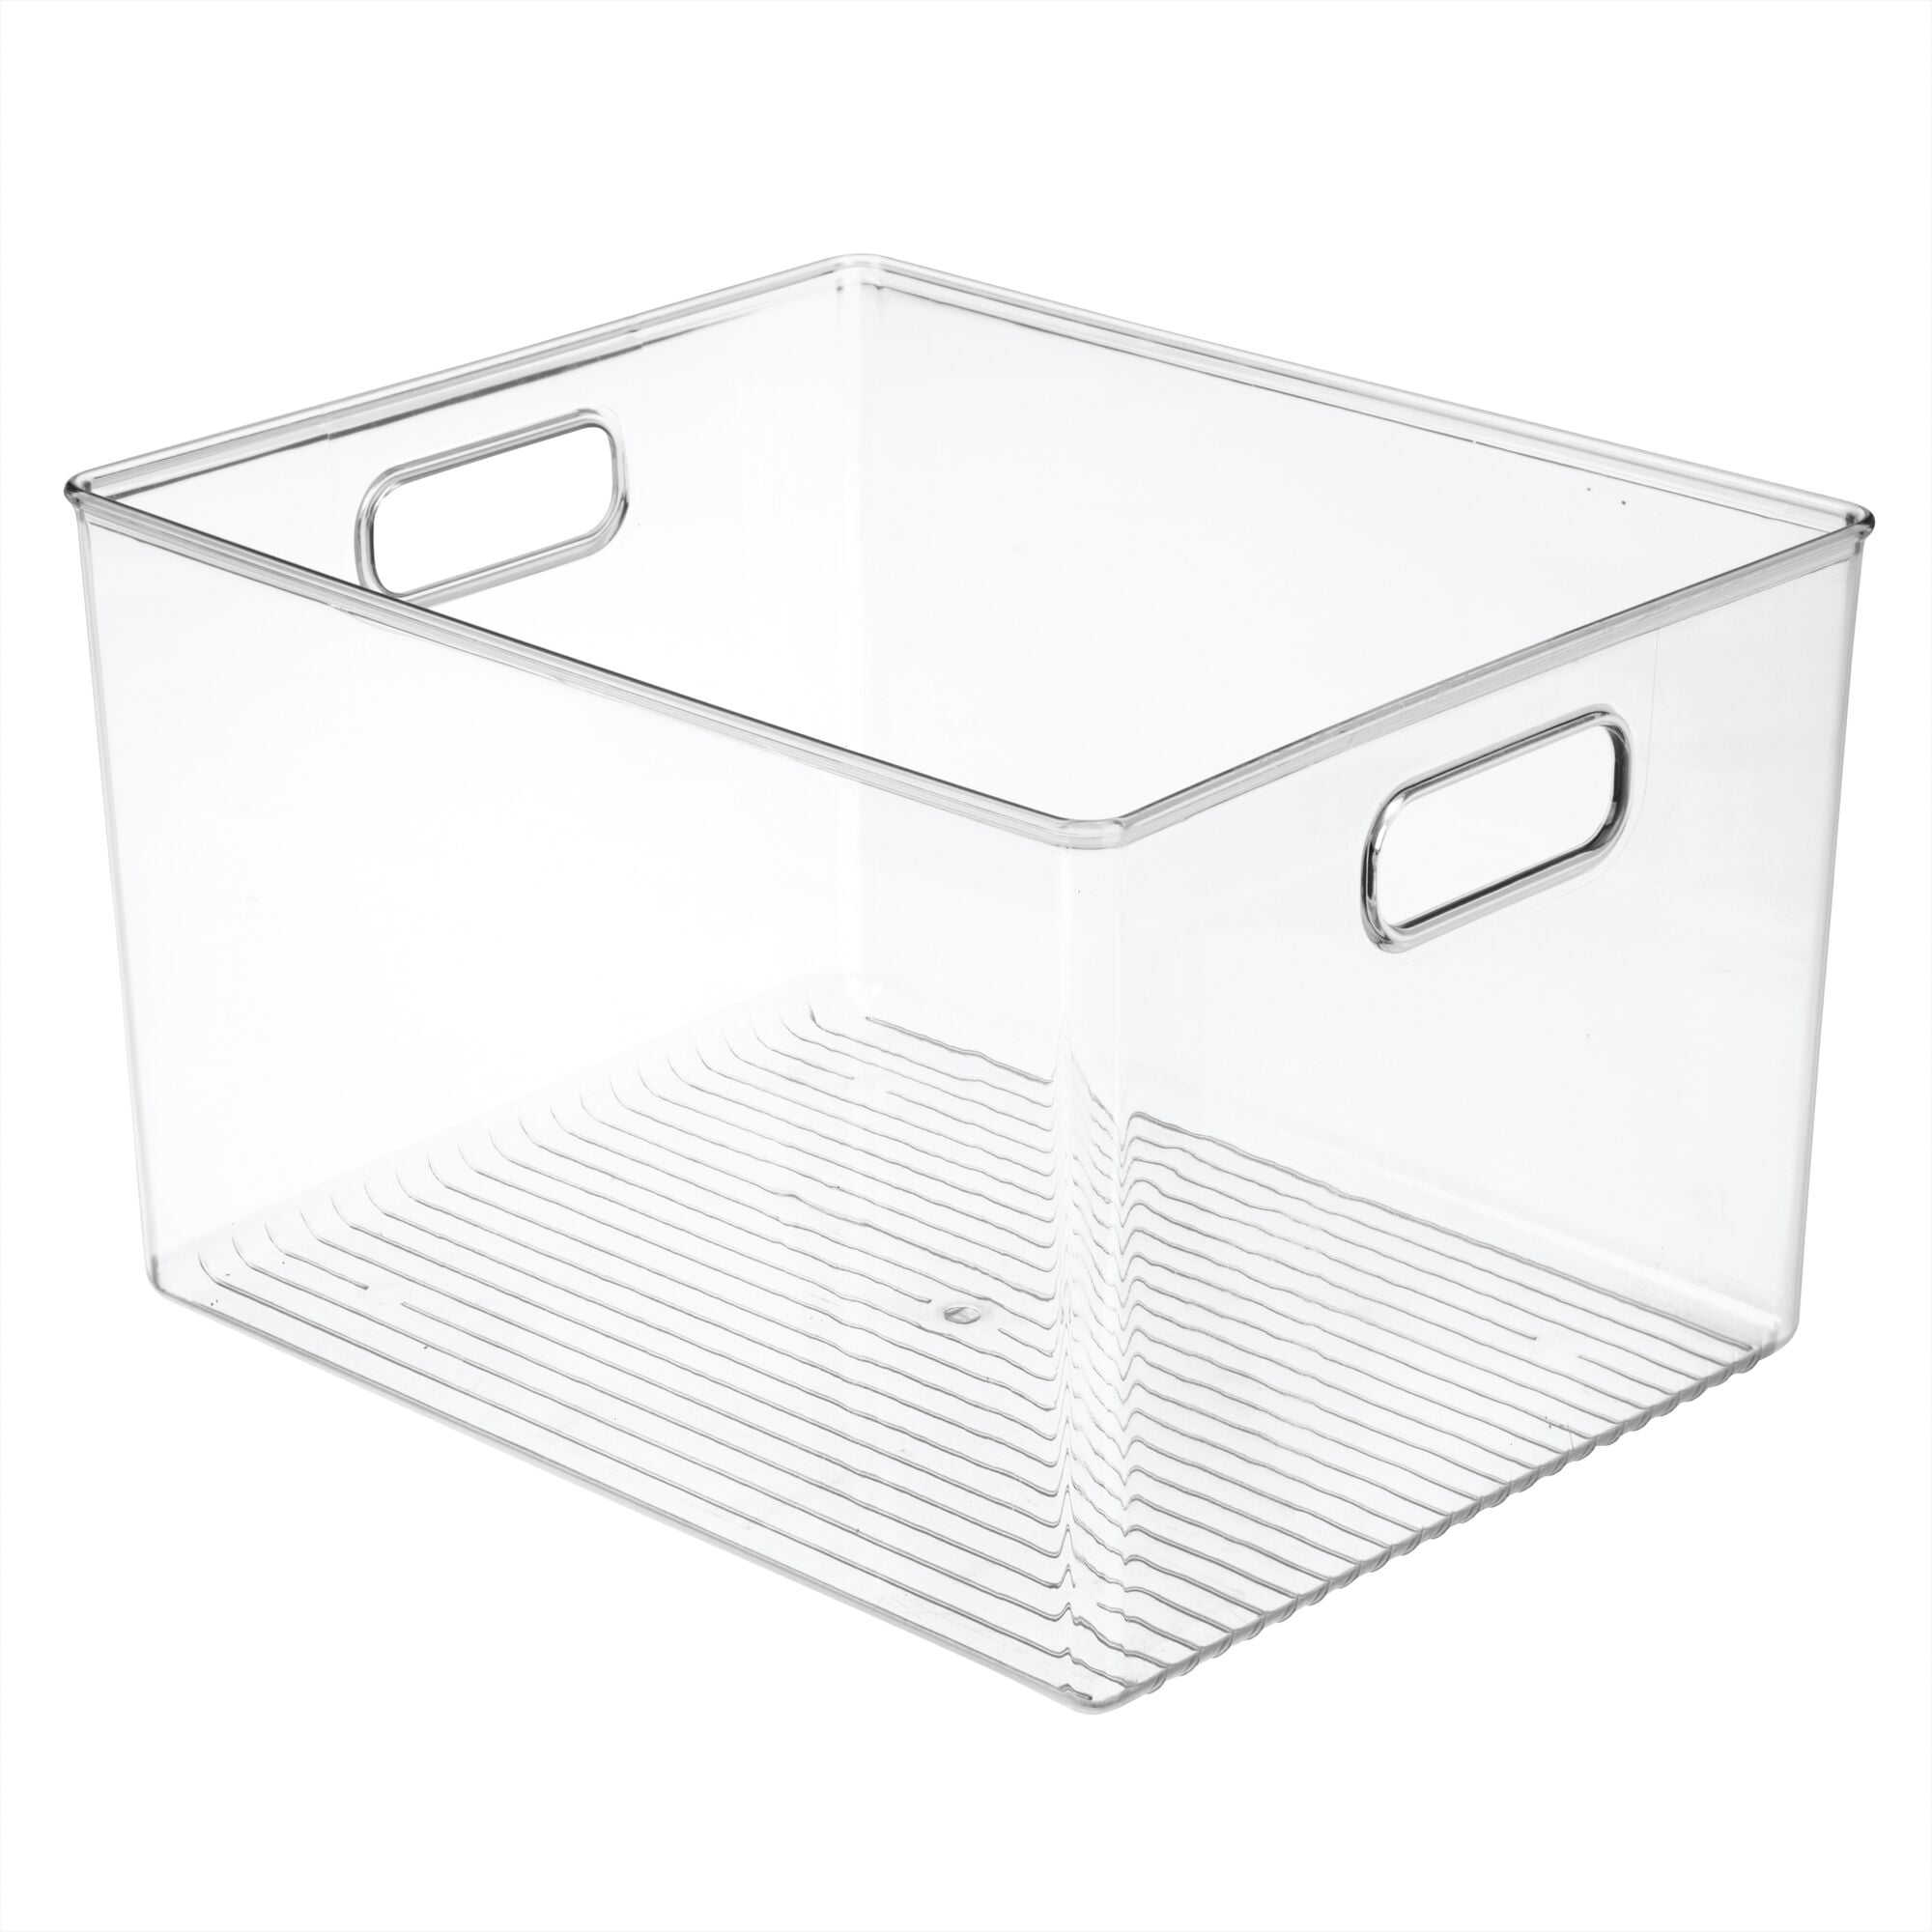 2 Pack mDesign Plastic Storage Organizer Bin with Handles for Closets Clear 